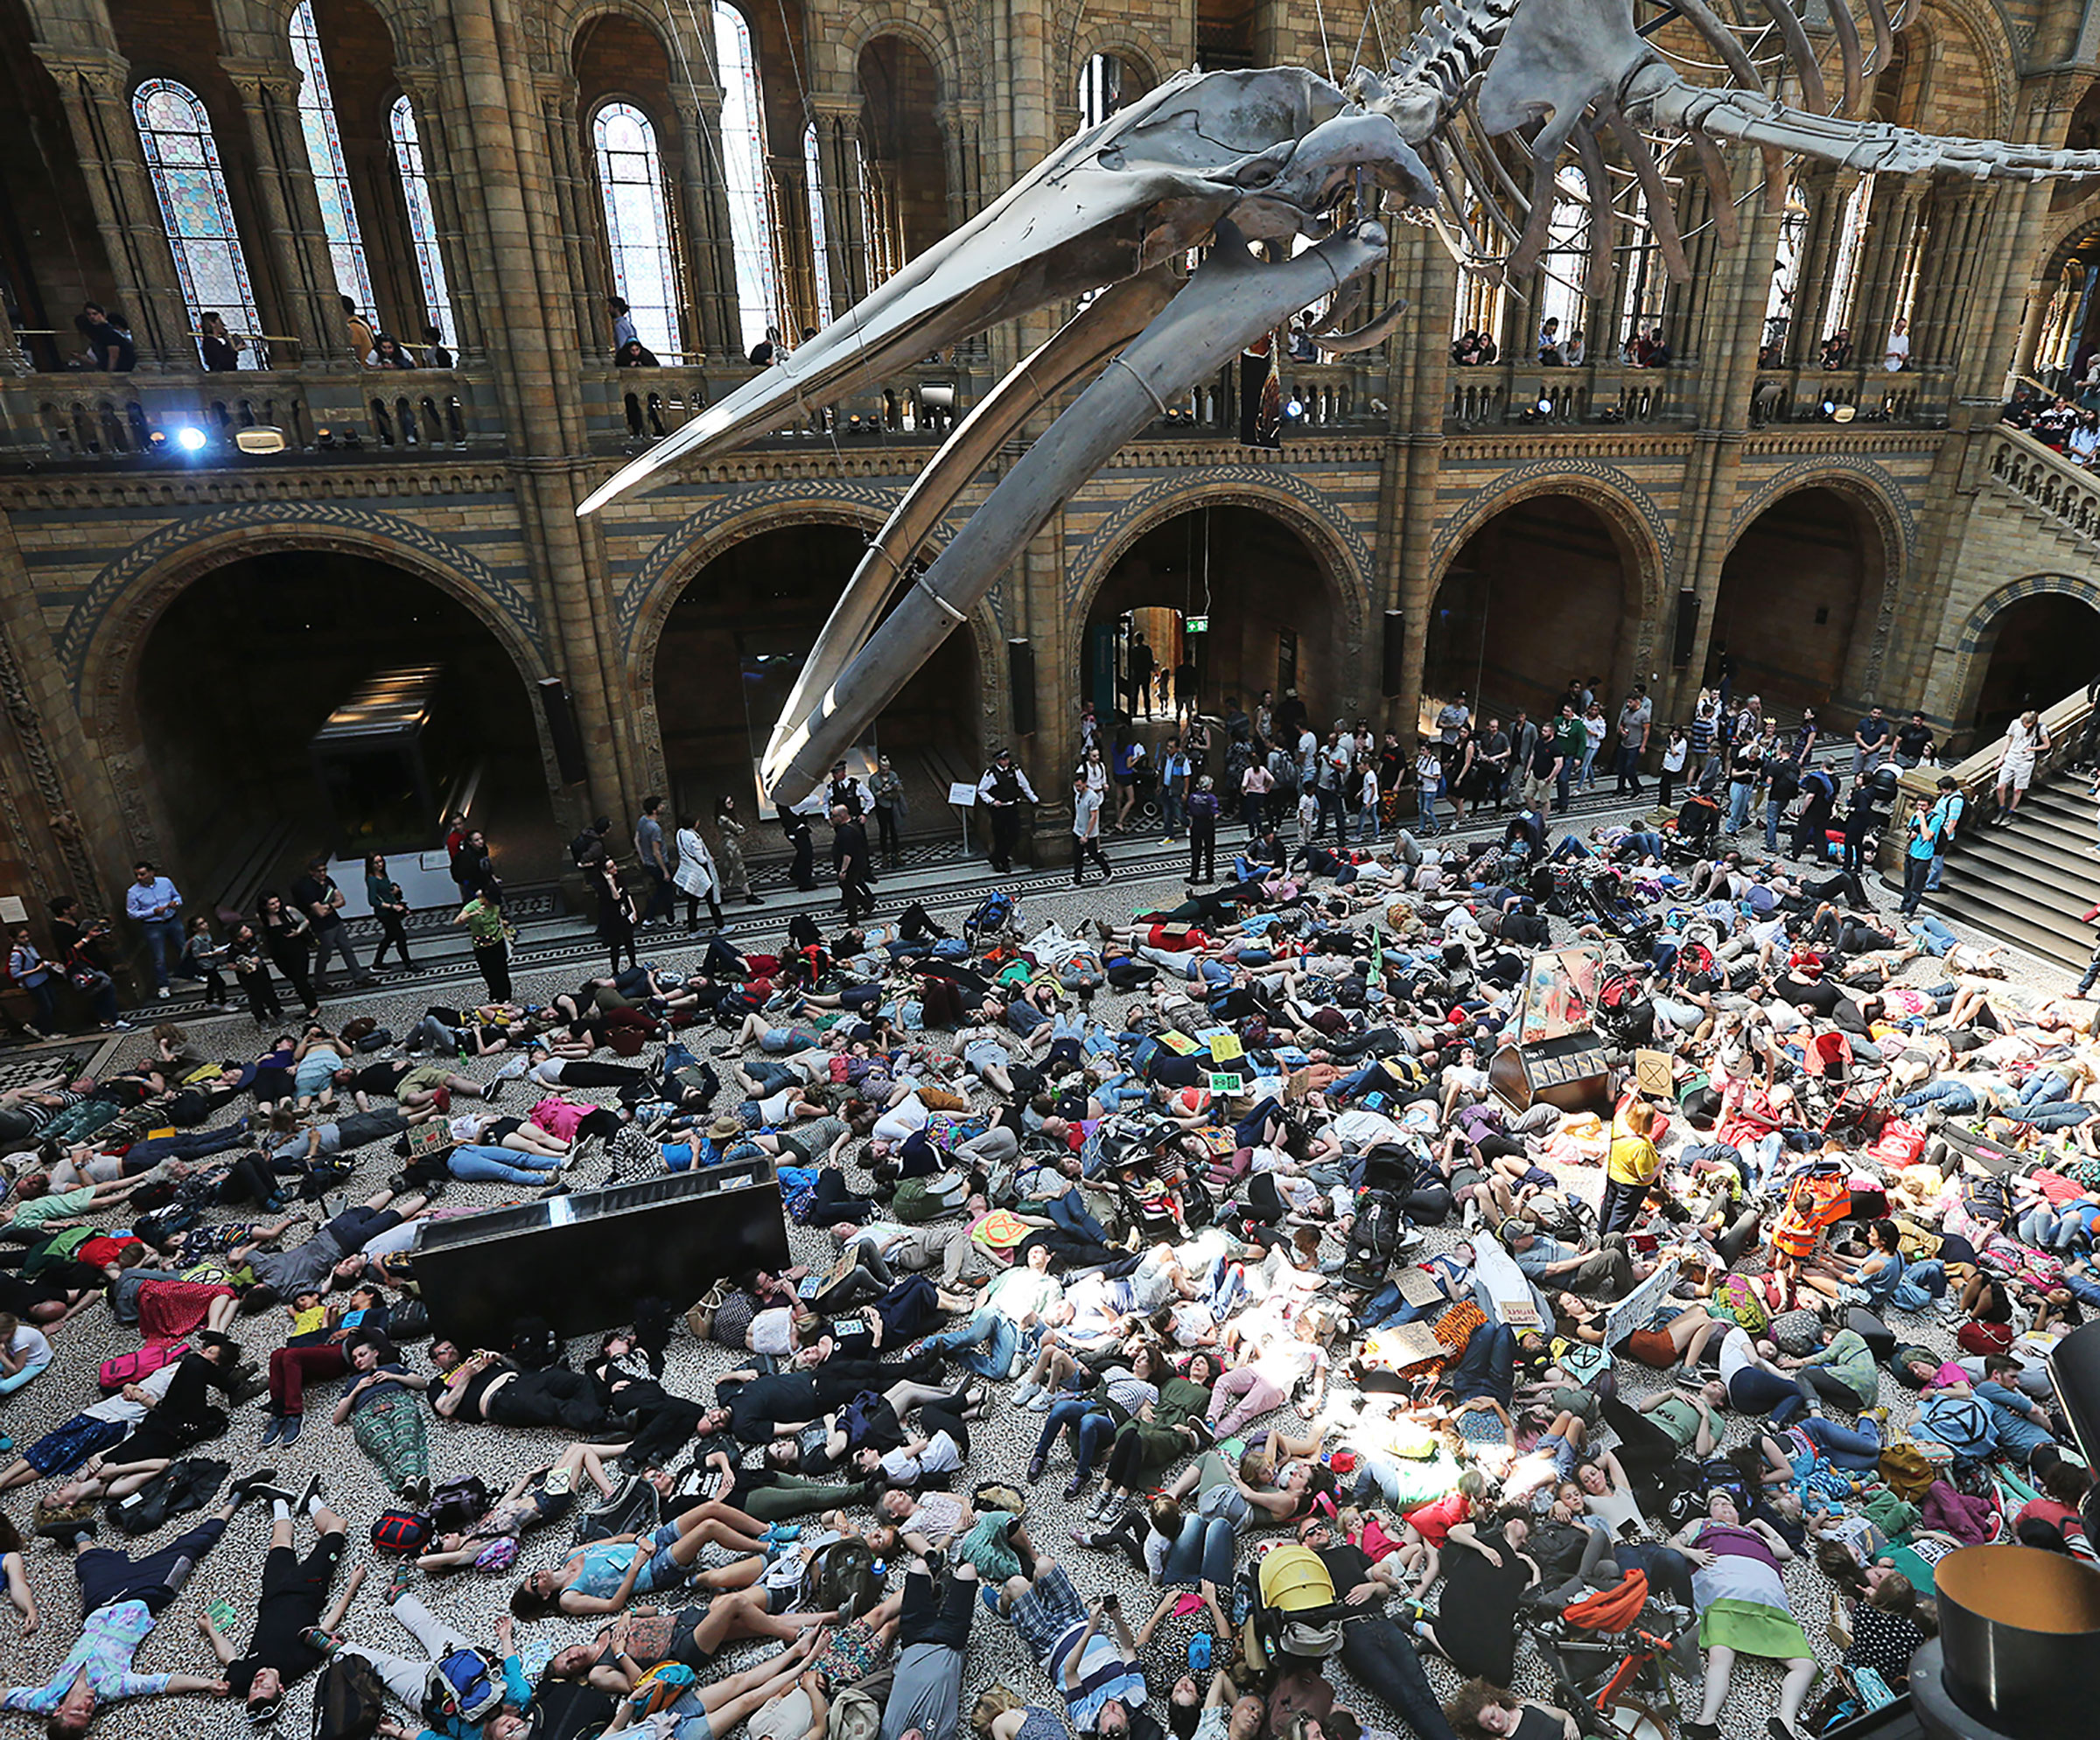 A die-in protest under the blue-whale skeleton at the Natural History Museum in London on April 22. (Steve Bell—Camera Press/Redux)